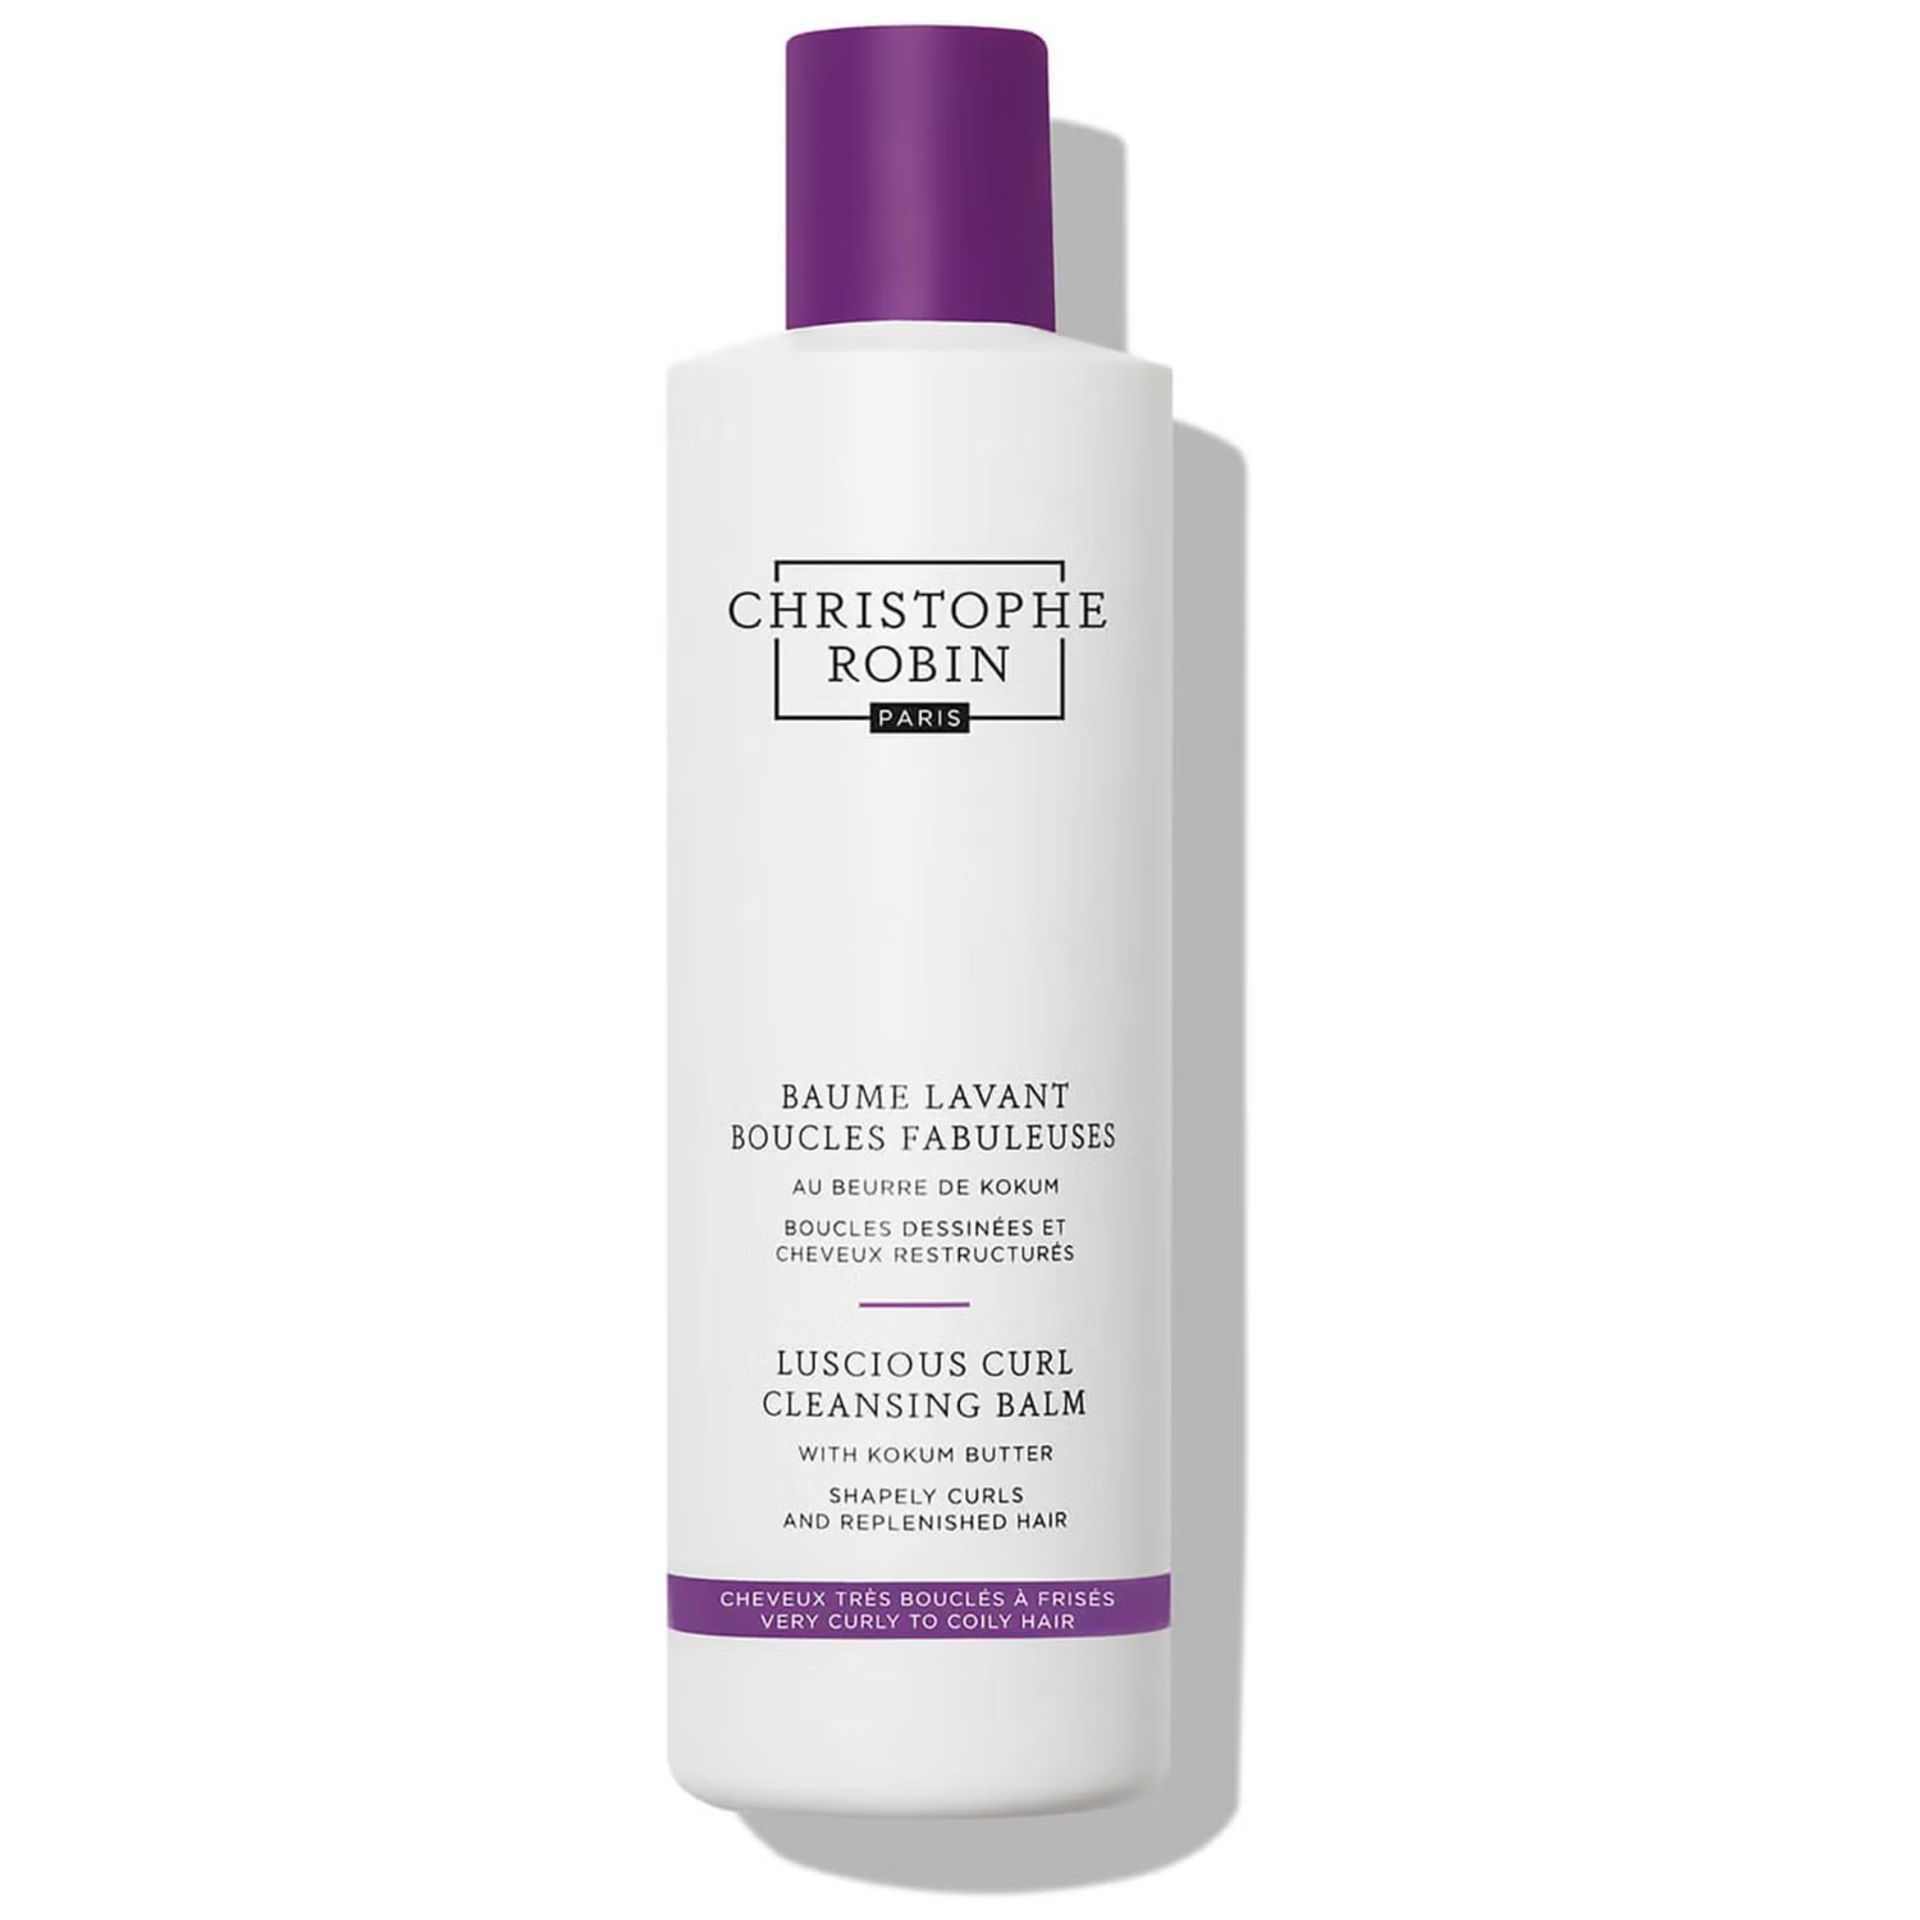 30 X BRAND NEW CHRISTOPHE ROBIN 250ML LUSCIOUS CURL CLEANSING BALM WITH KOKUM BUTTER RRP £30 EACH